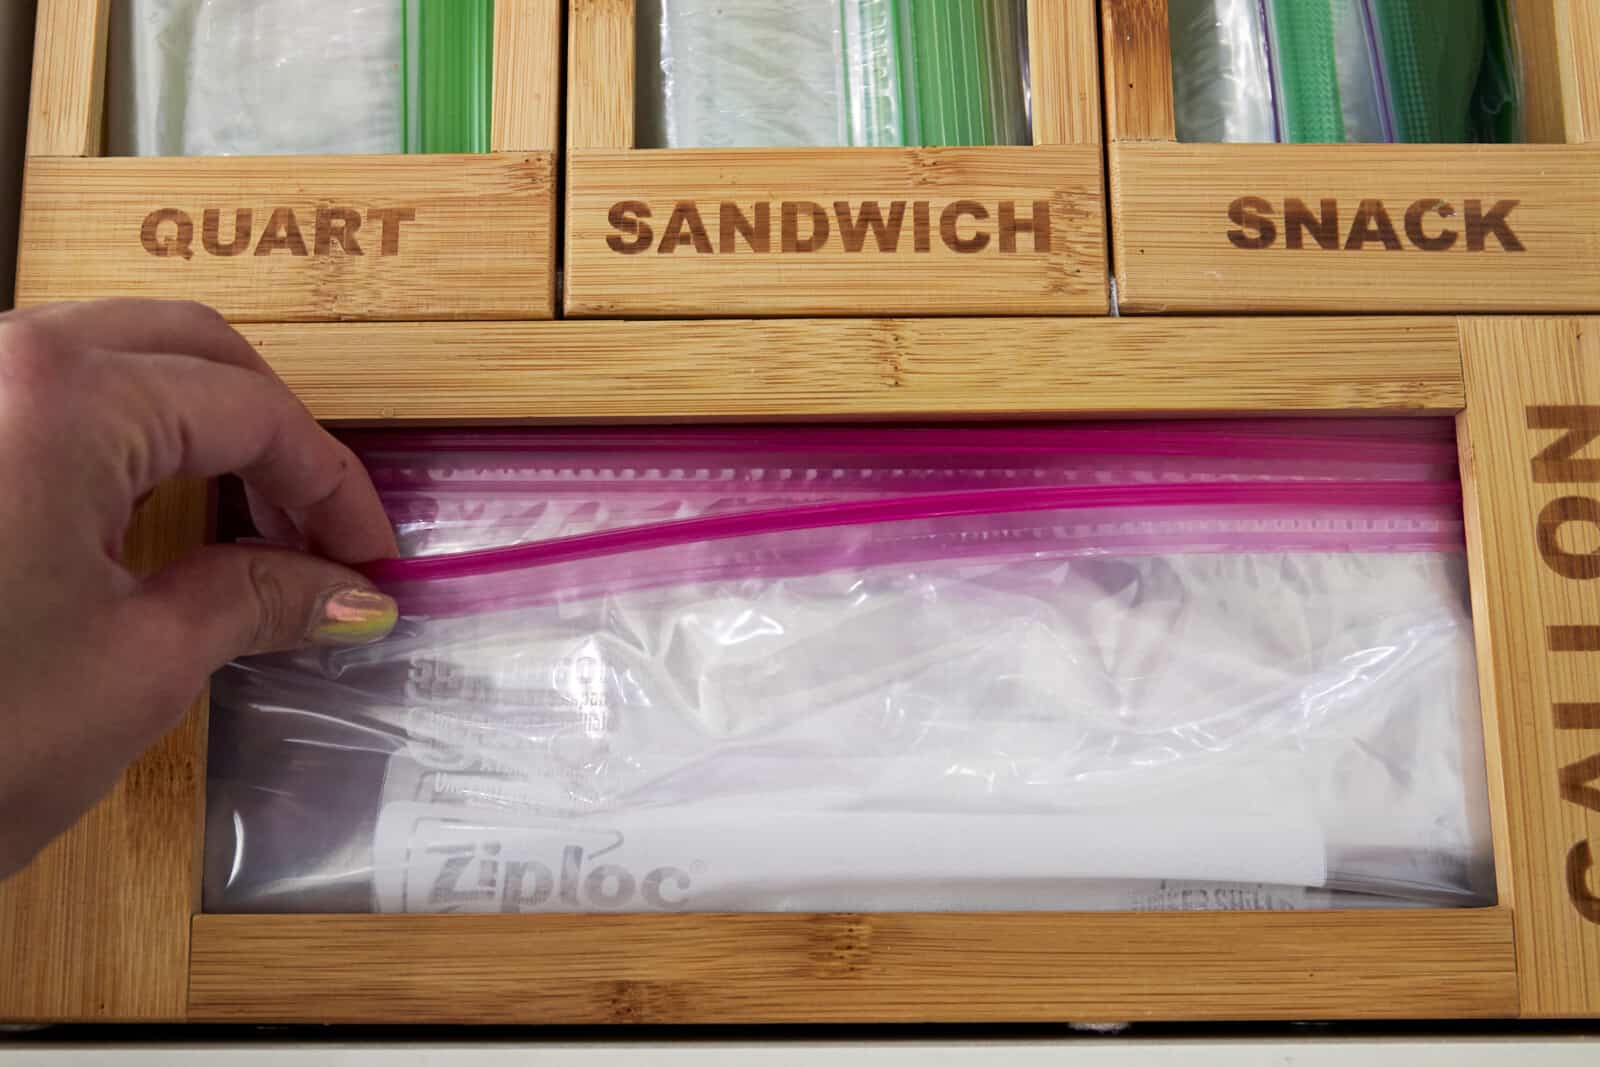 Keep Storage Bags in One Spot With This 'Must-Have' Drawer Organizer